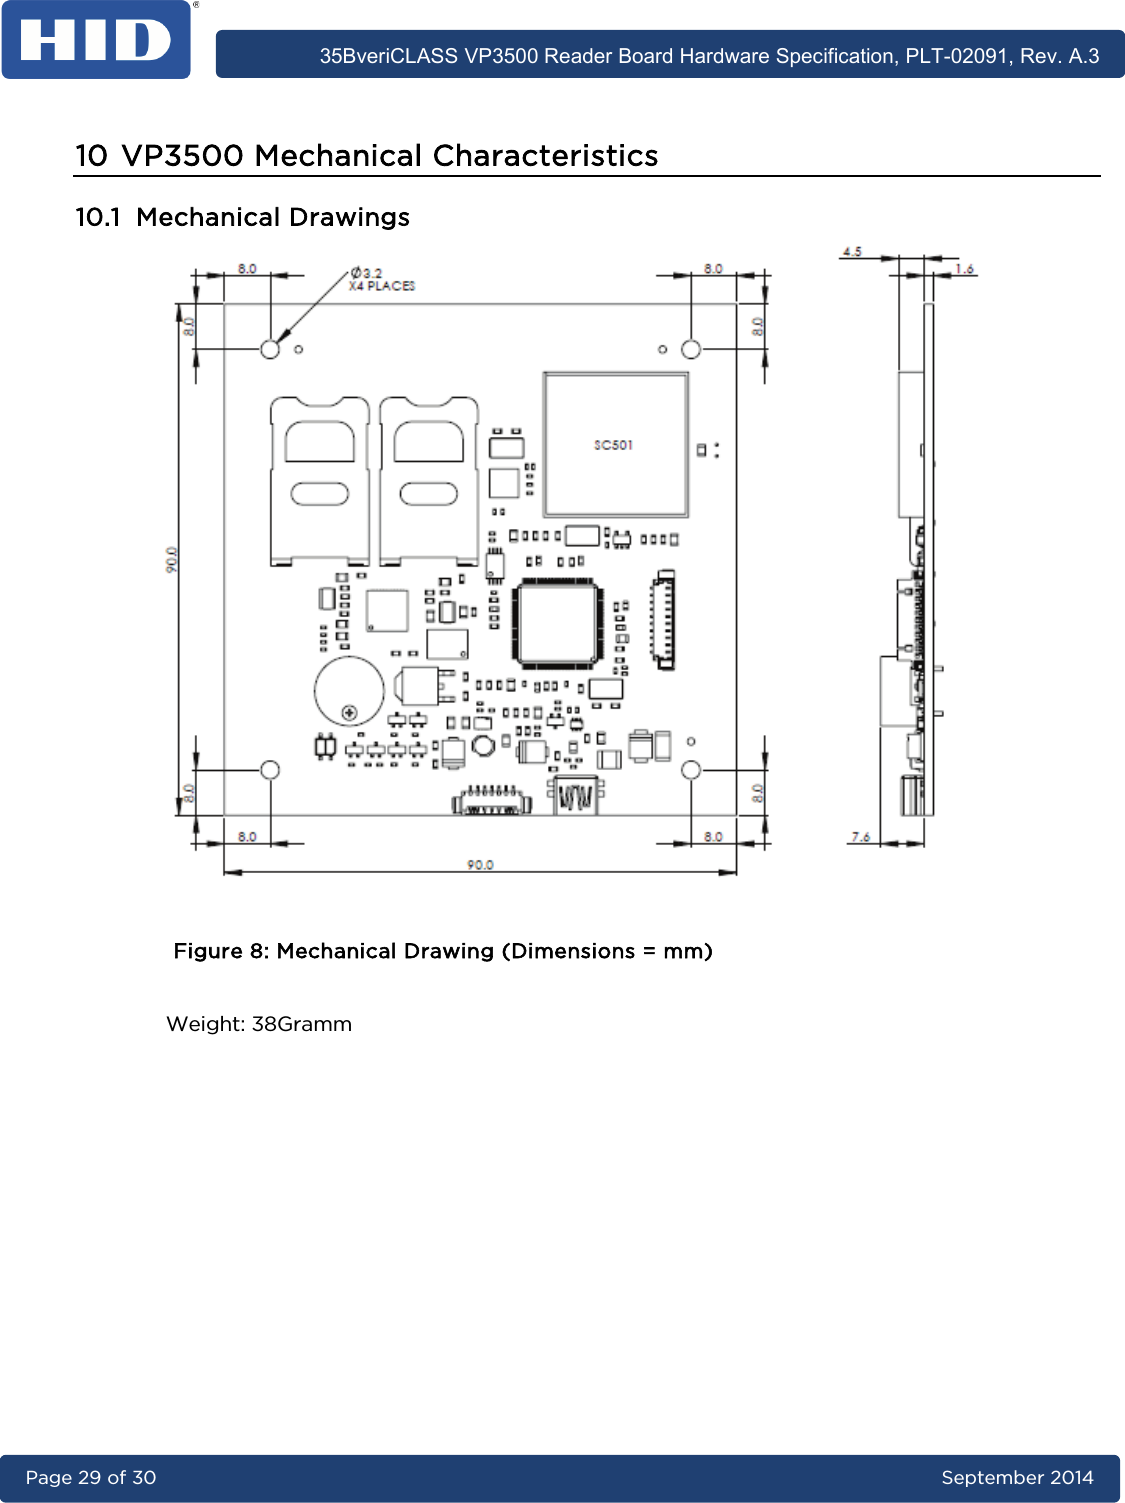      35BveriCLASS VP3500 Reader Board Hardware Specification, PLT-02091, Rev. A.3 Page 29 of 30   September 2014  10 VP3500 Mechanical Characteristics 10.1 Mechanical Drawings  Figure 8: Mechanical Drawing (Dimensions = mm)  Weight: 38Gramm         